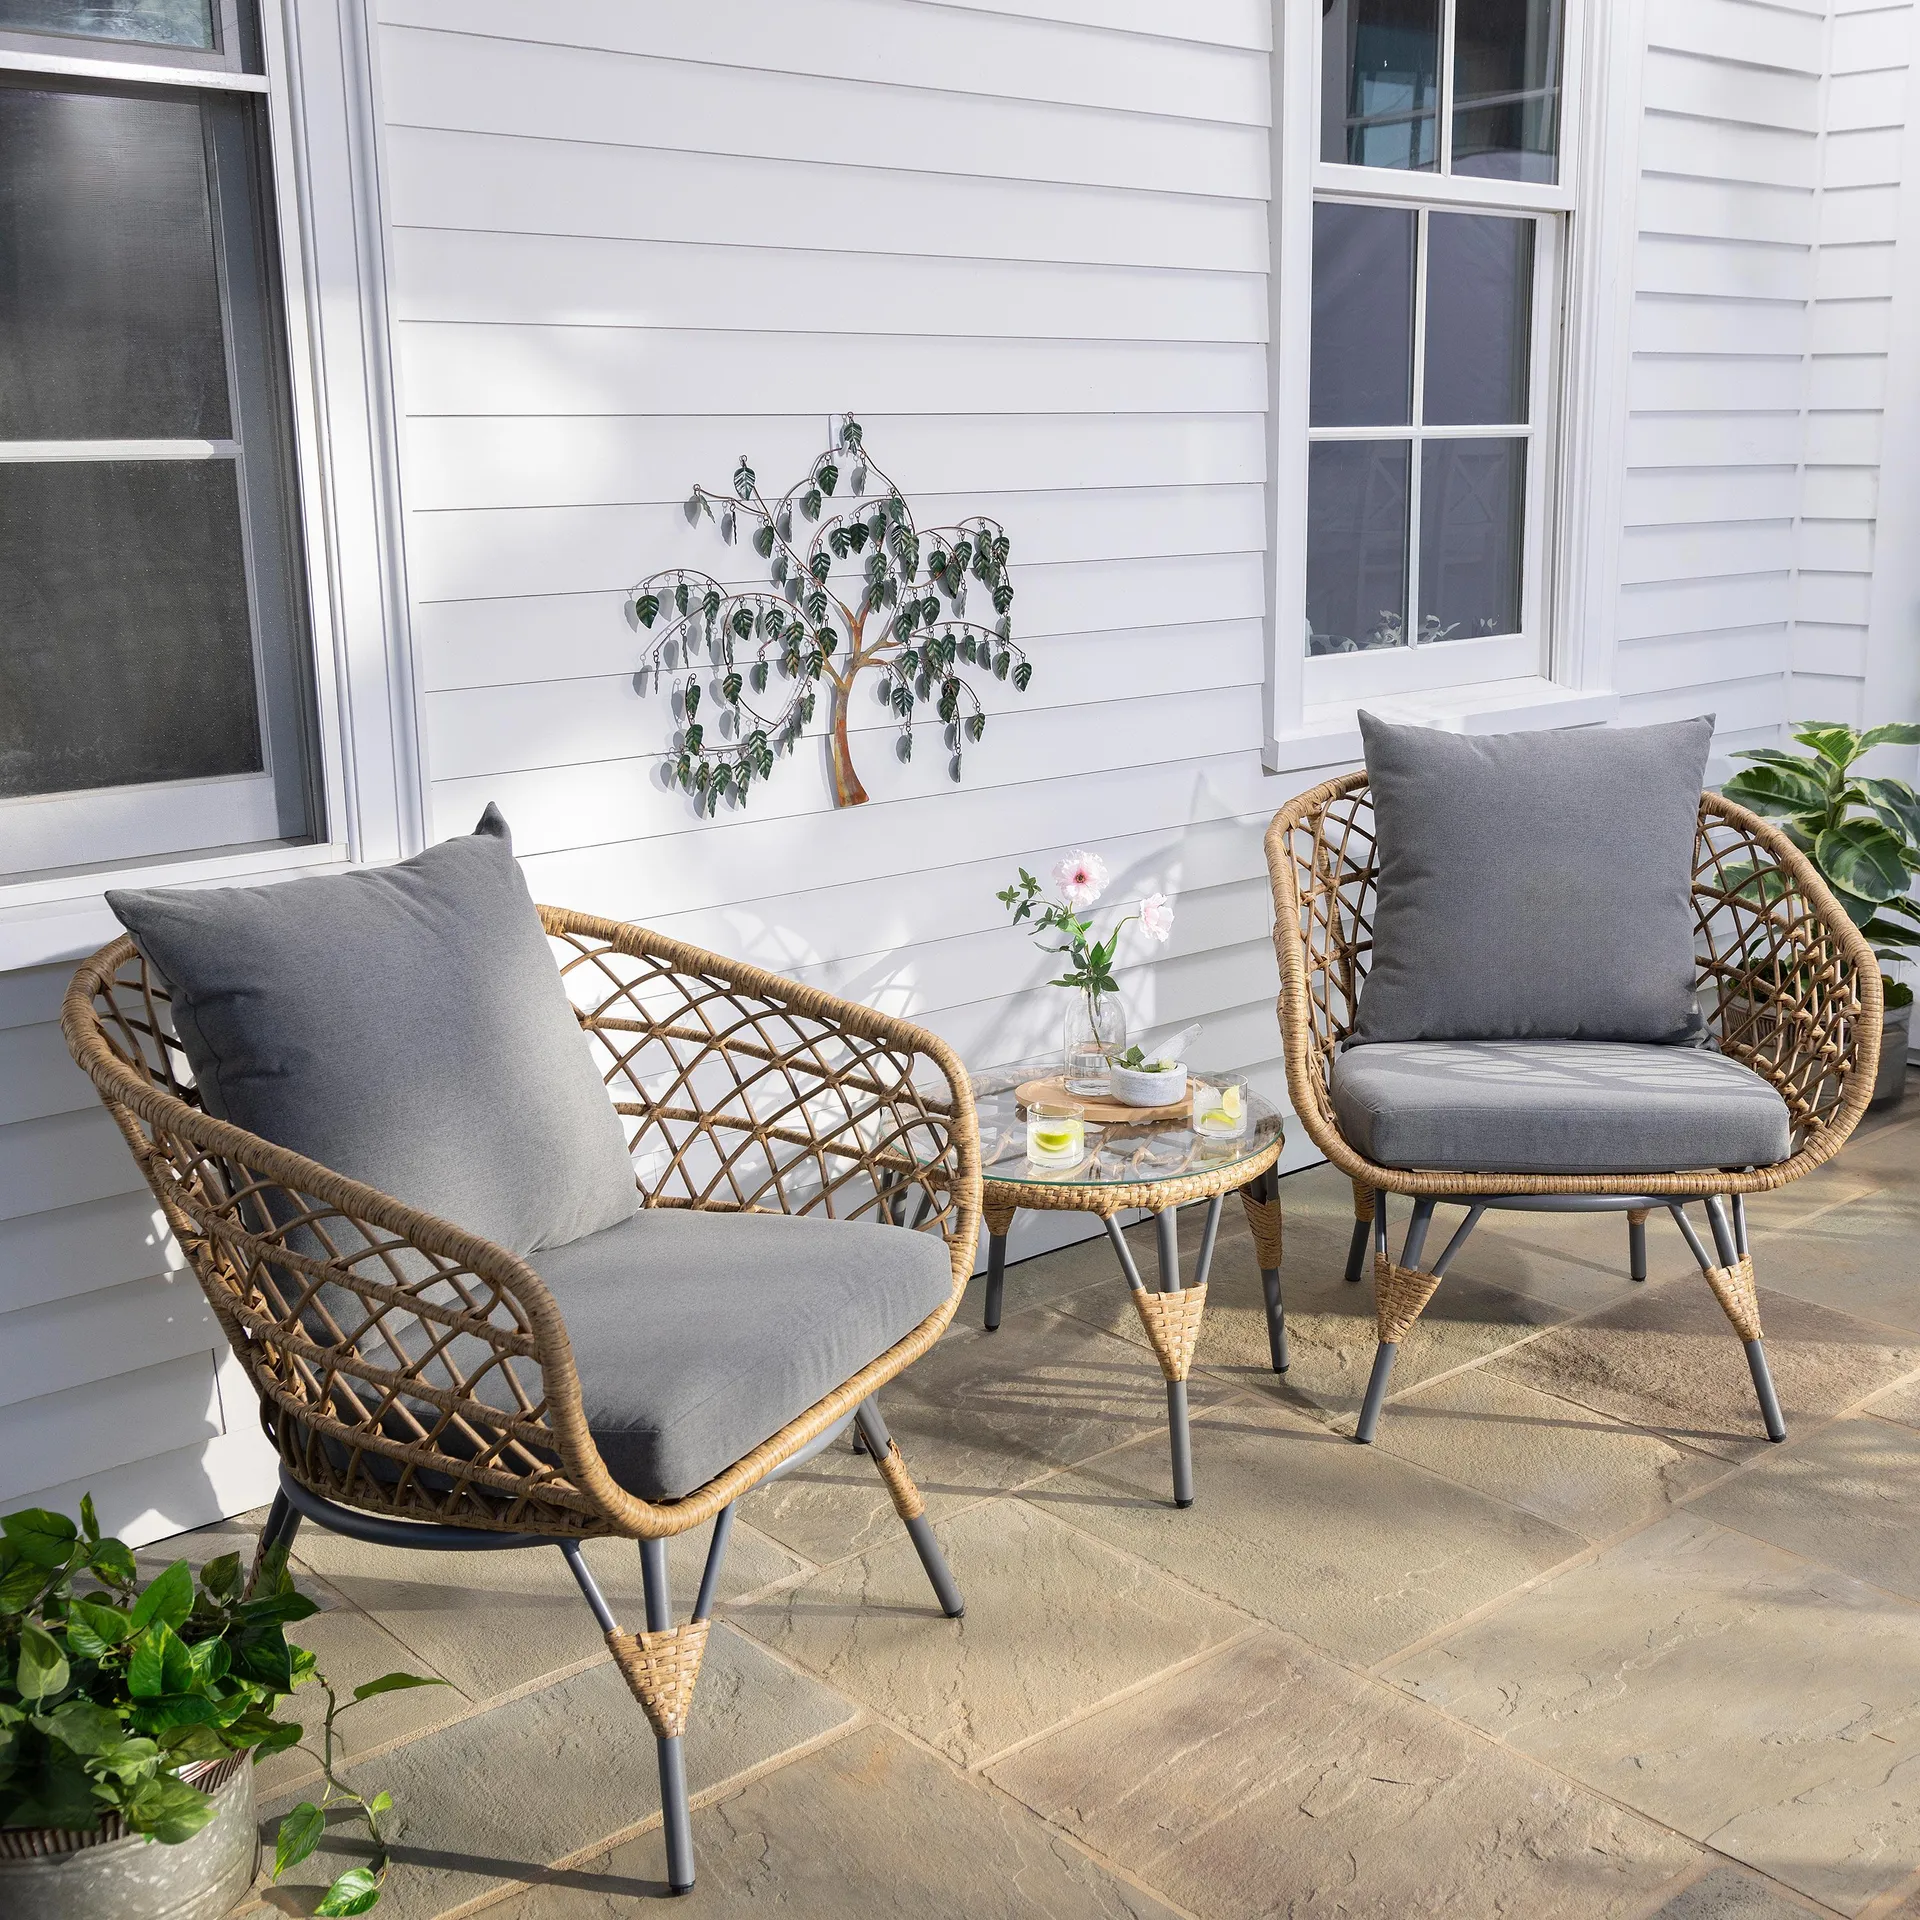 Havana Wicker Seating Set with Cushions and Table, 3-Piece Set - Natural